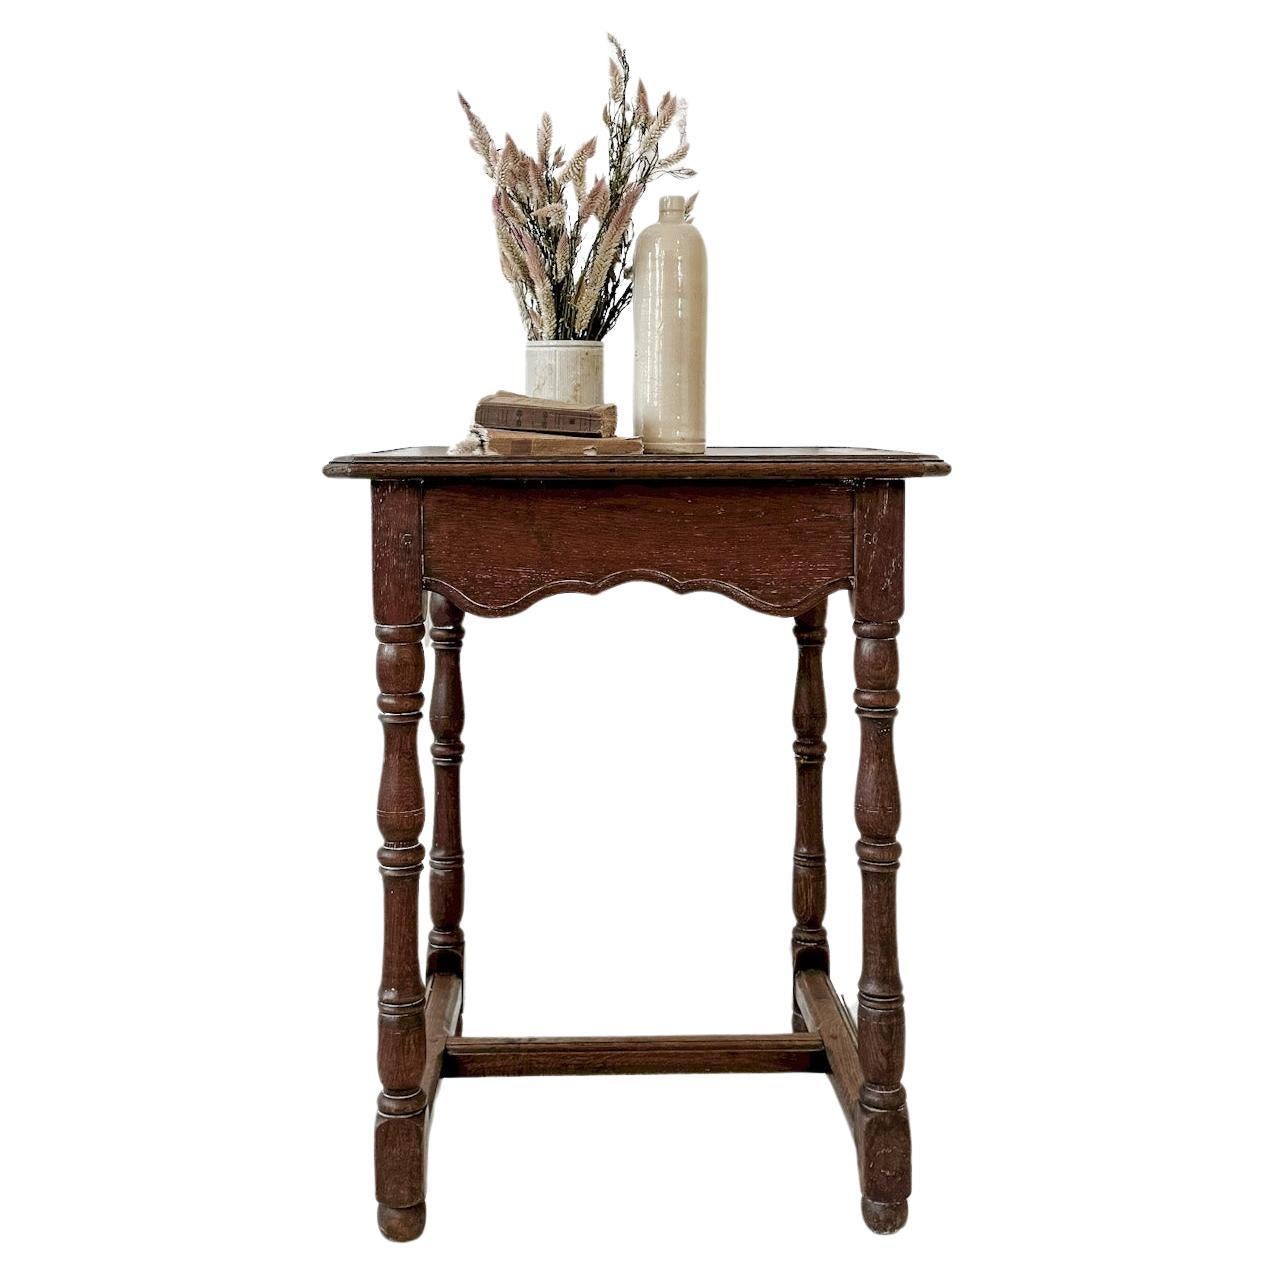 19th Century English Trestle Base Accent Table with Dark Stain For Sale